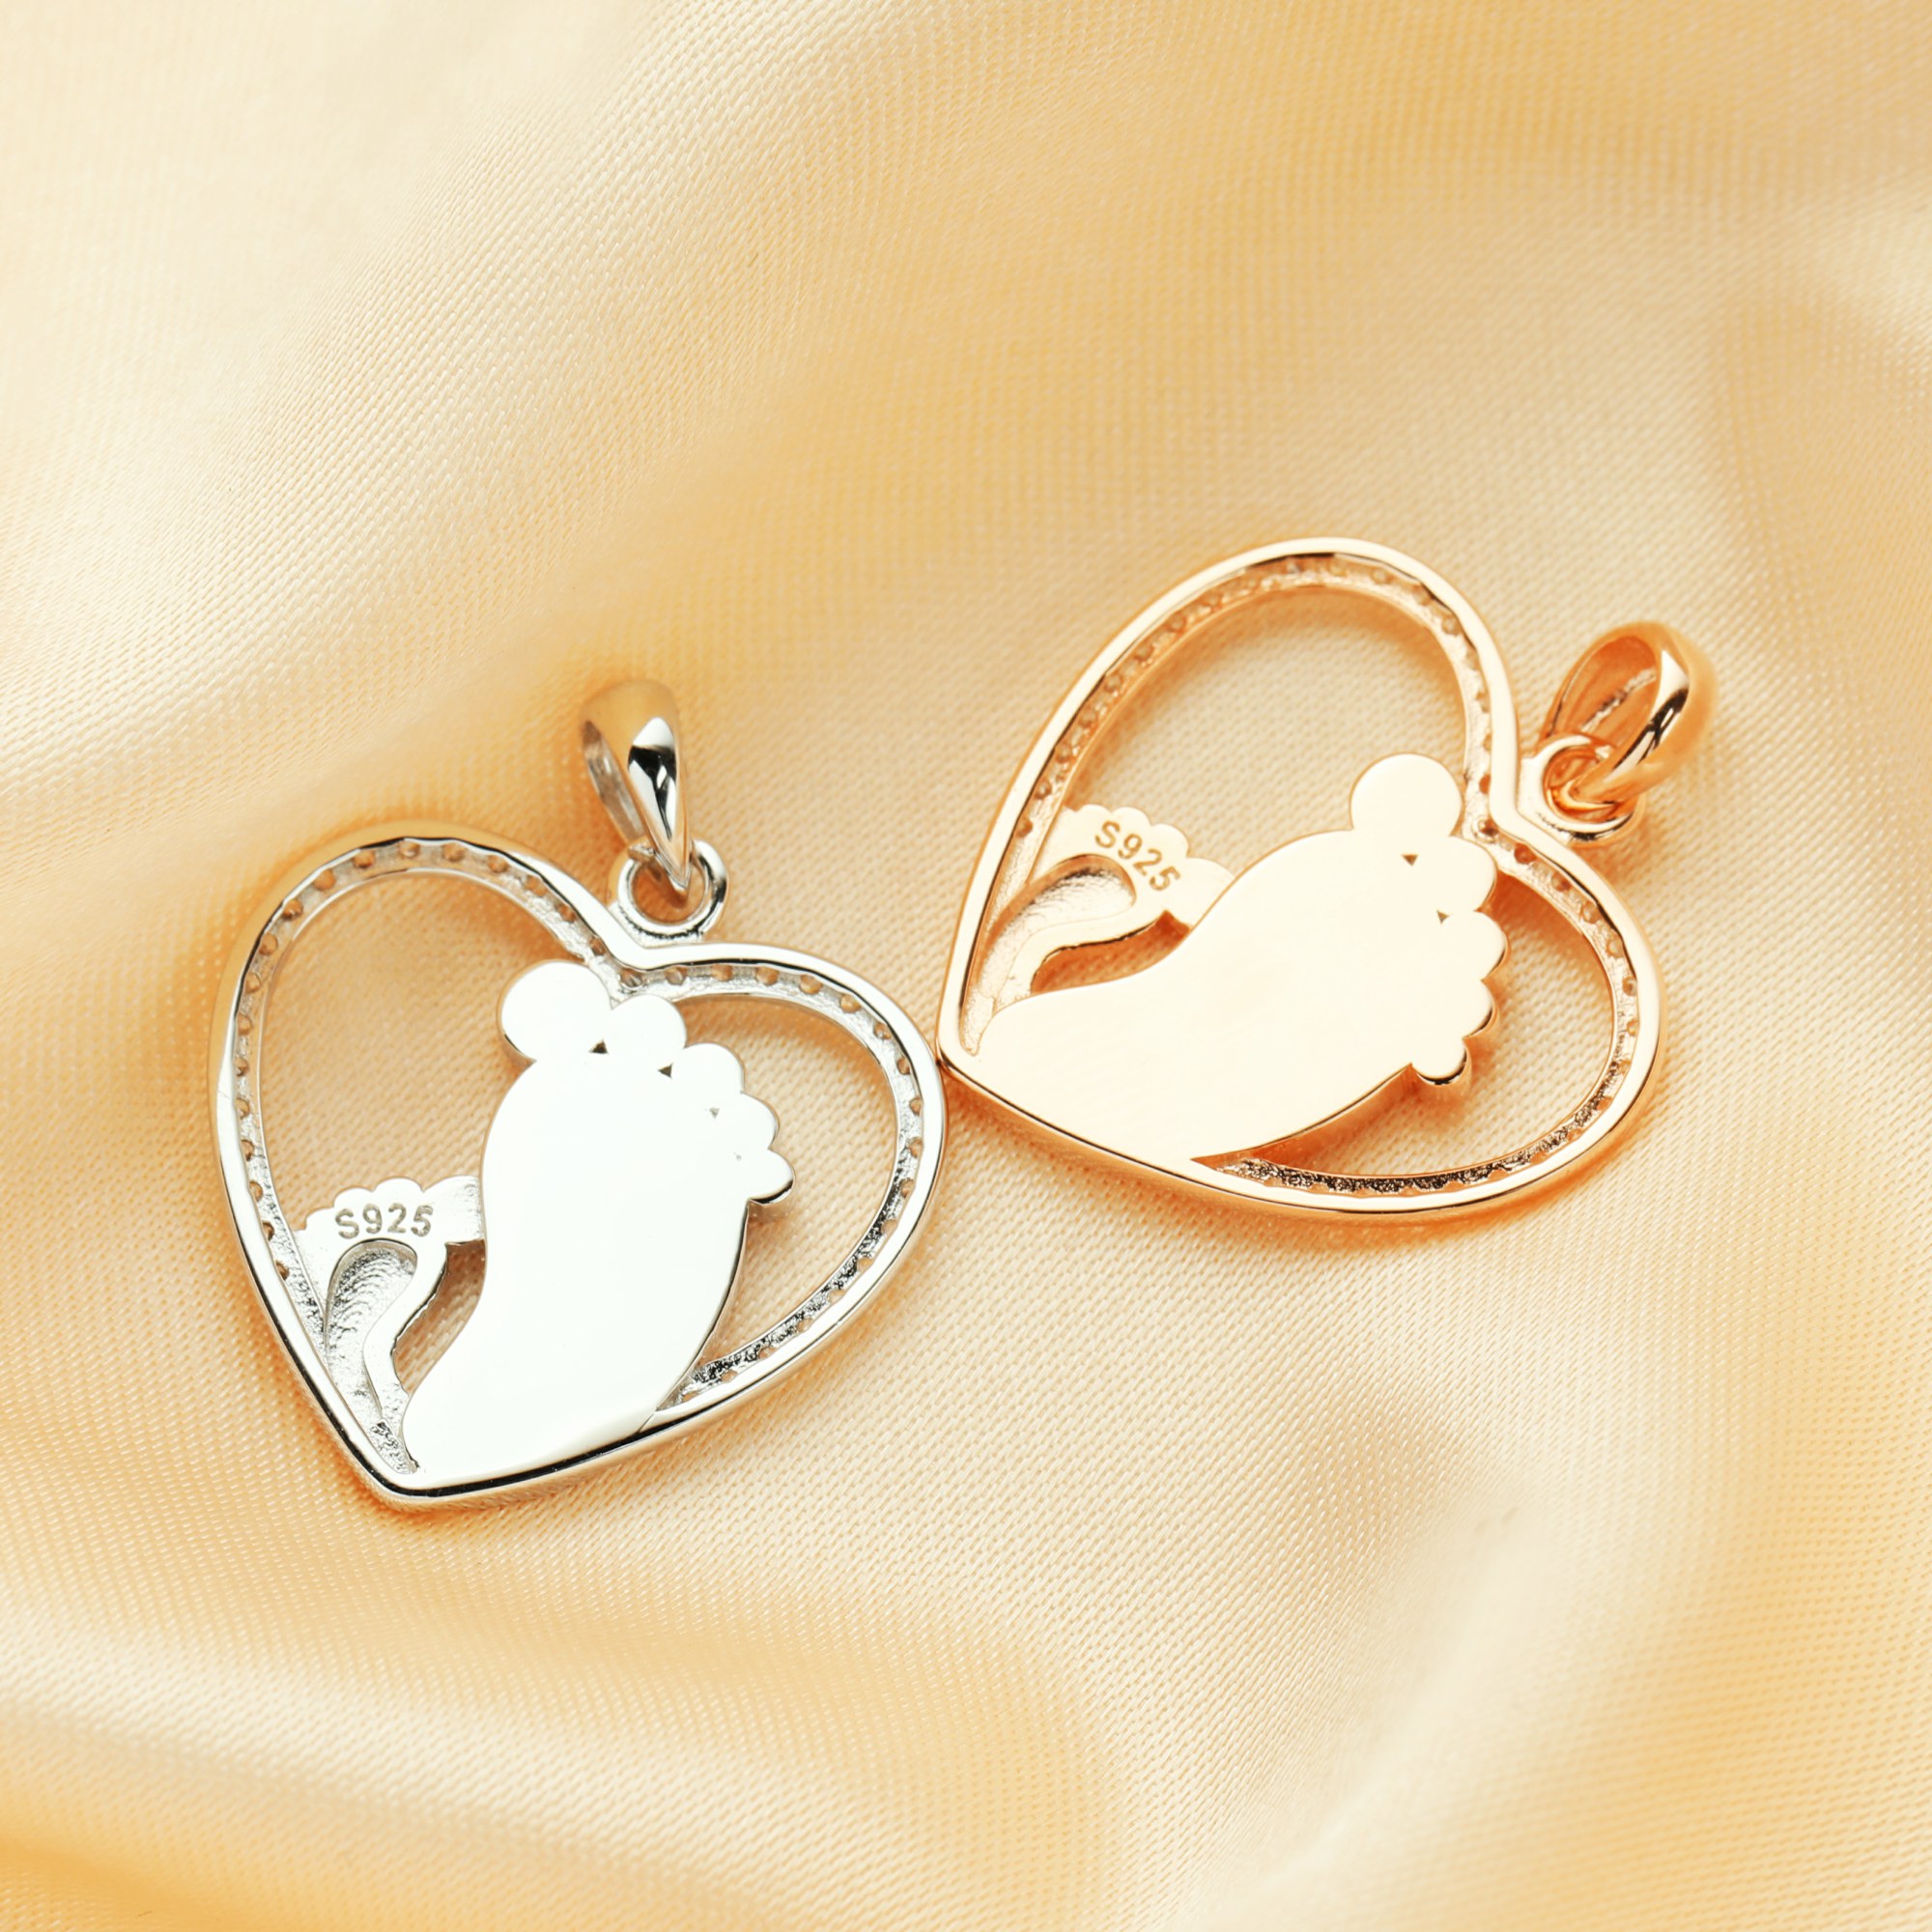 6x11MM Baby Footprint Keepsake Breast Milk Resin Pendant Bezel Settings,Solid 925 Sterling Silver Rose Gold Plated Pendant,DIY Memory Jewelry Supplies Overall Size 21MM 1431224 - Click Image to Close